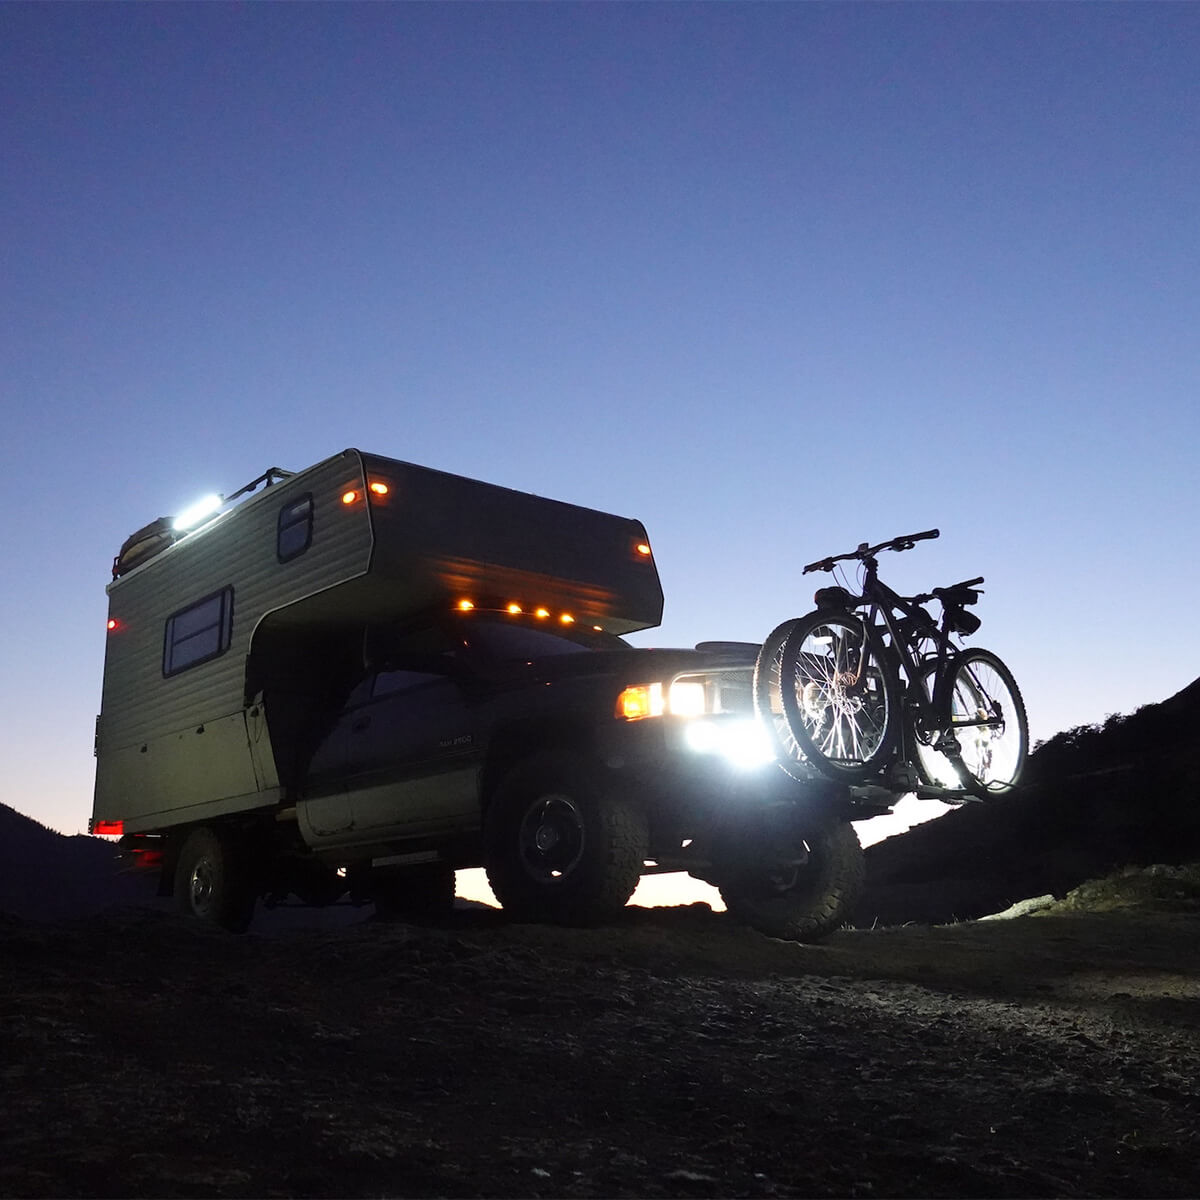 Lifted Dodge Ram truck with an overland camper